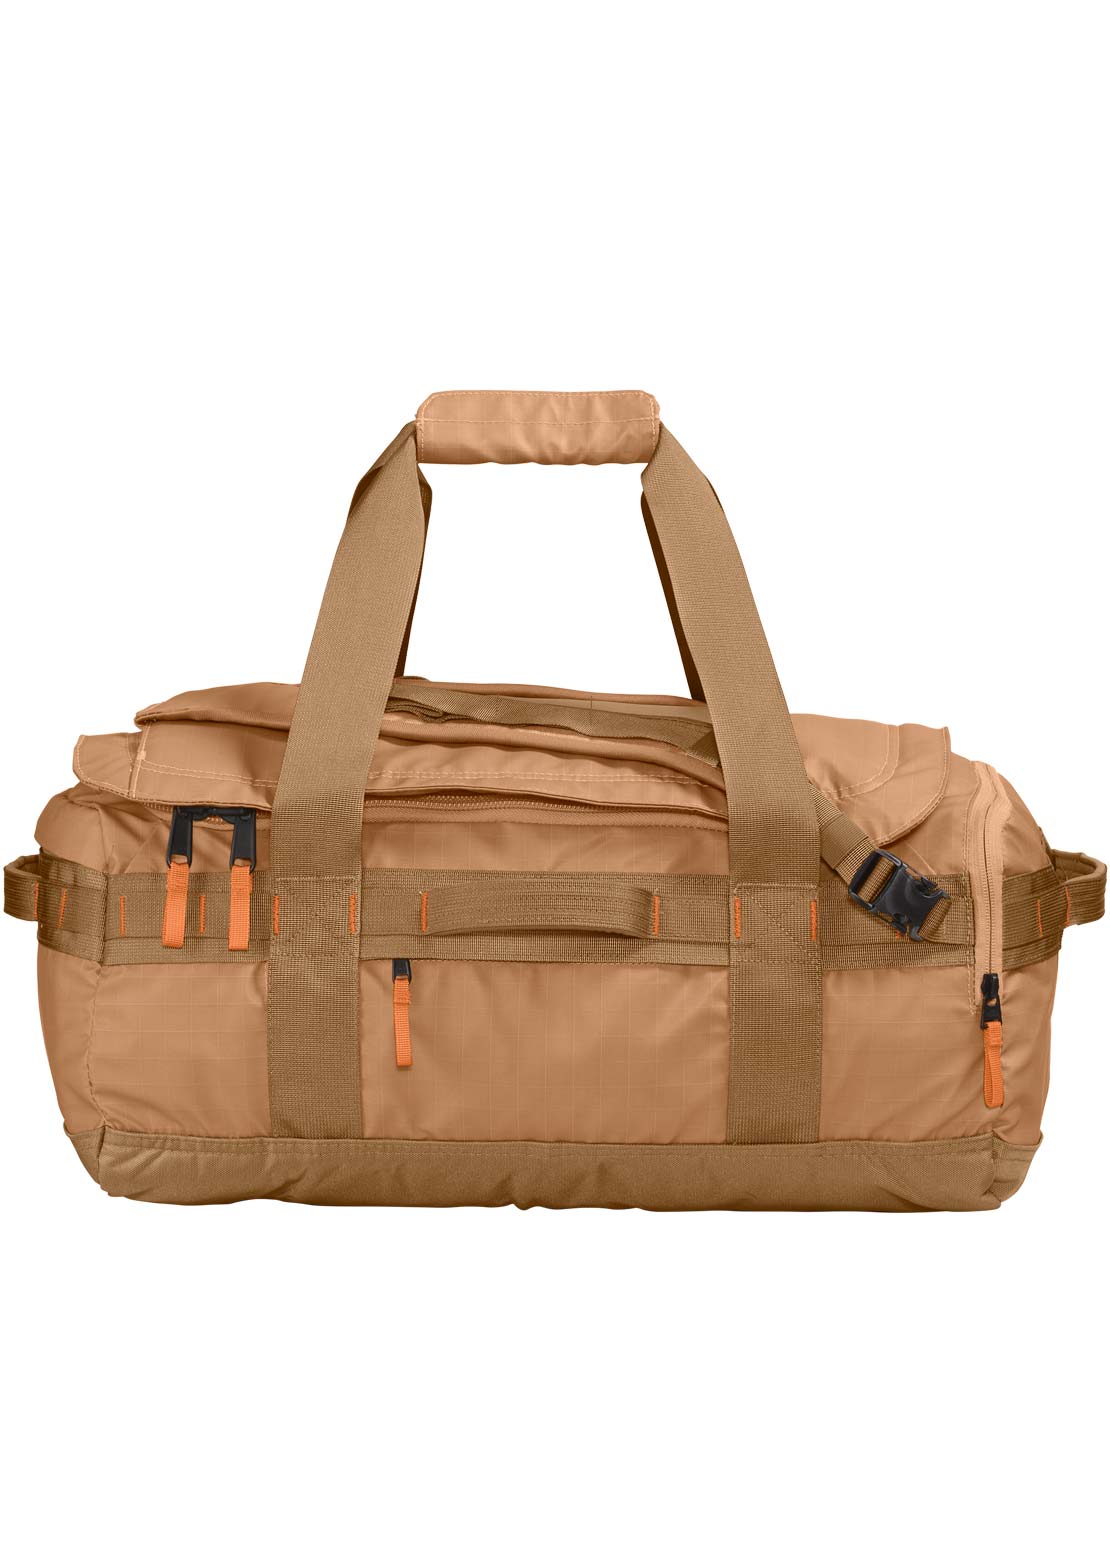 The North Face Base Camp Voyager 42L Duffel Bag Almond Butter/Utility Brown/Mandarin